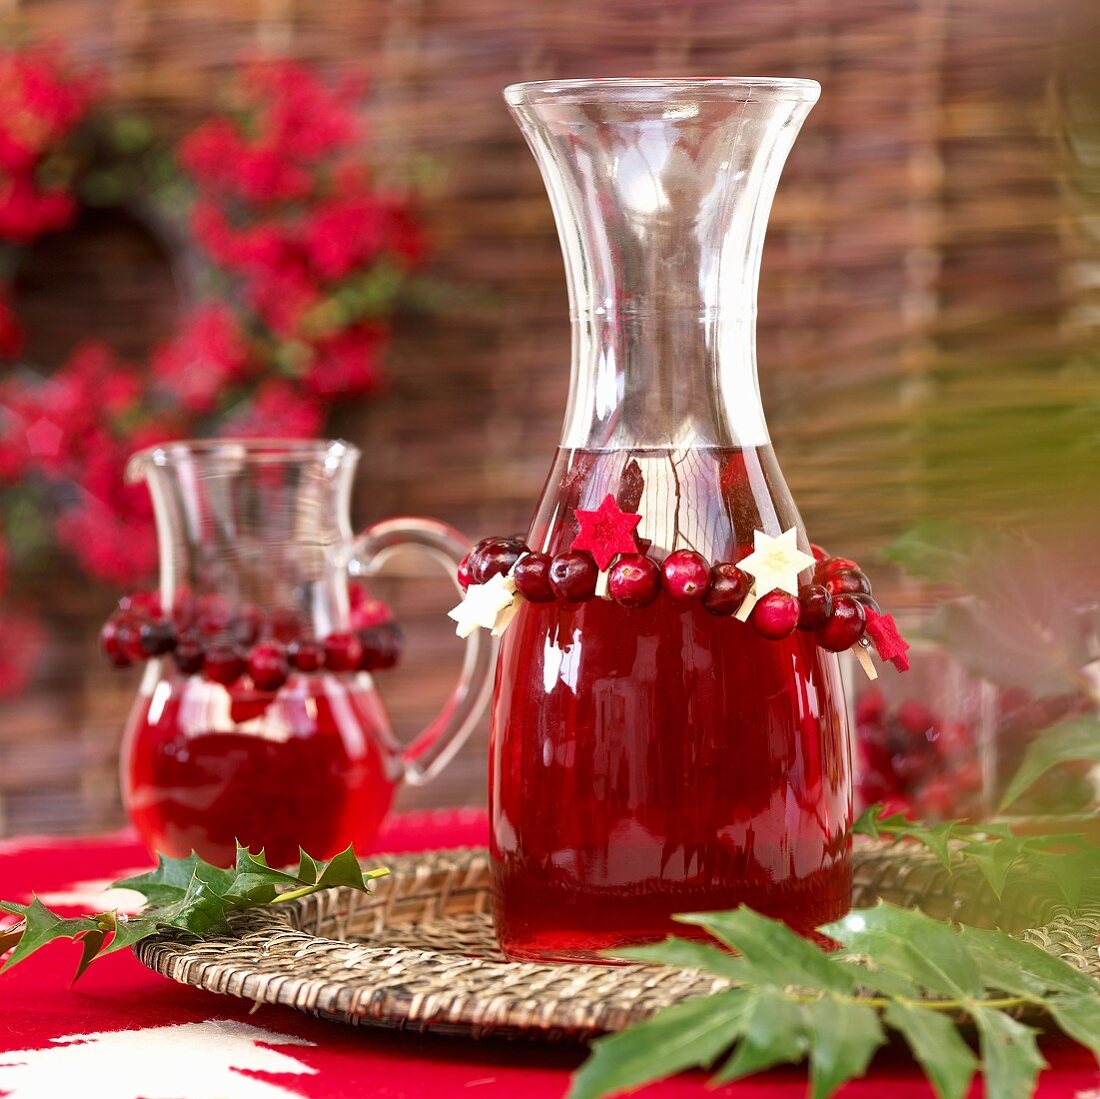 Cranberry juice in carafe and glass jug (Christmas)